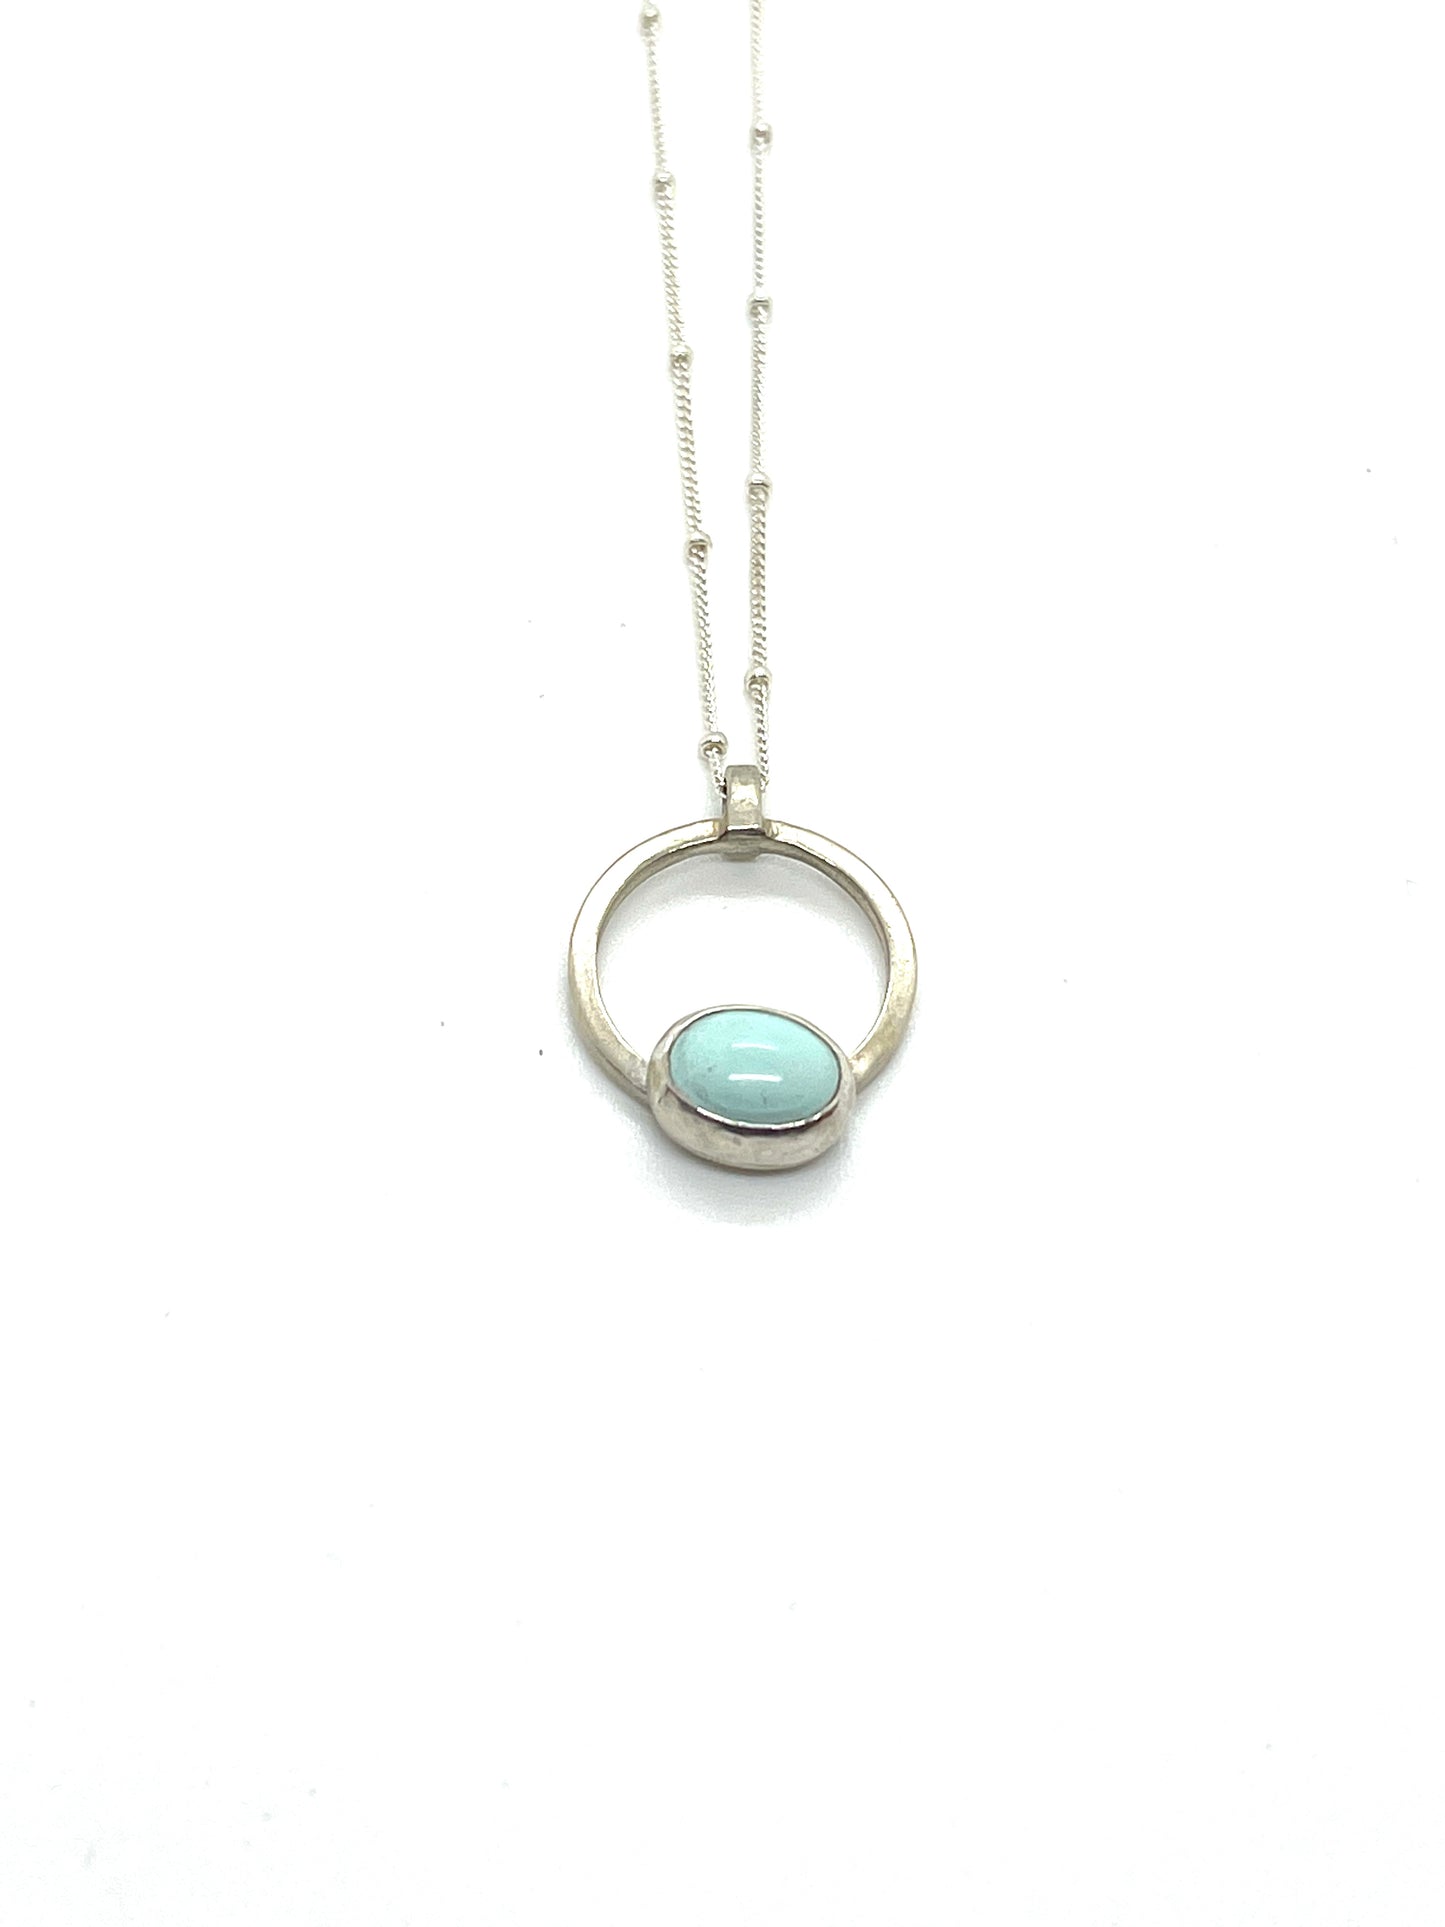 Tiny turquoise and sterling silver necklace